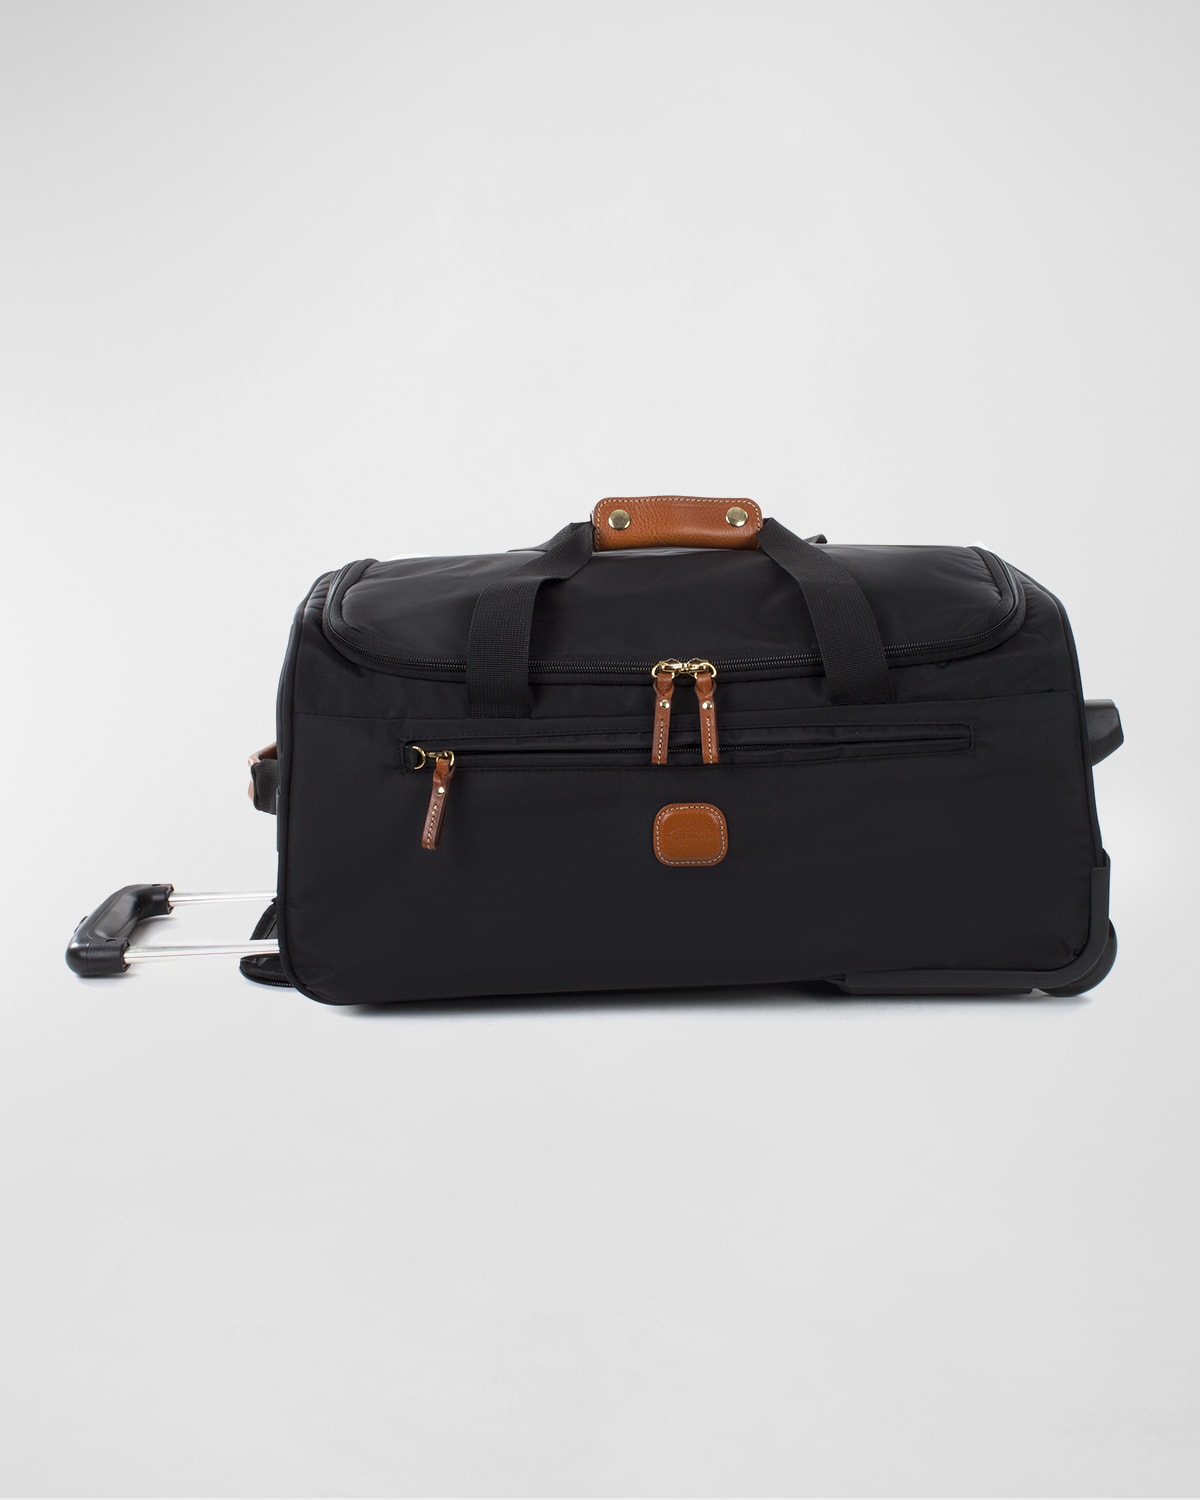 X-Bag 21" Carry-On Rolling Duffel Luggage